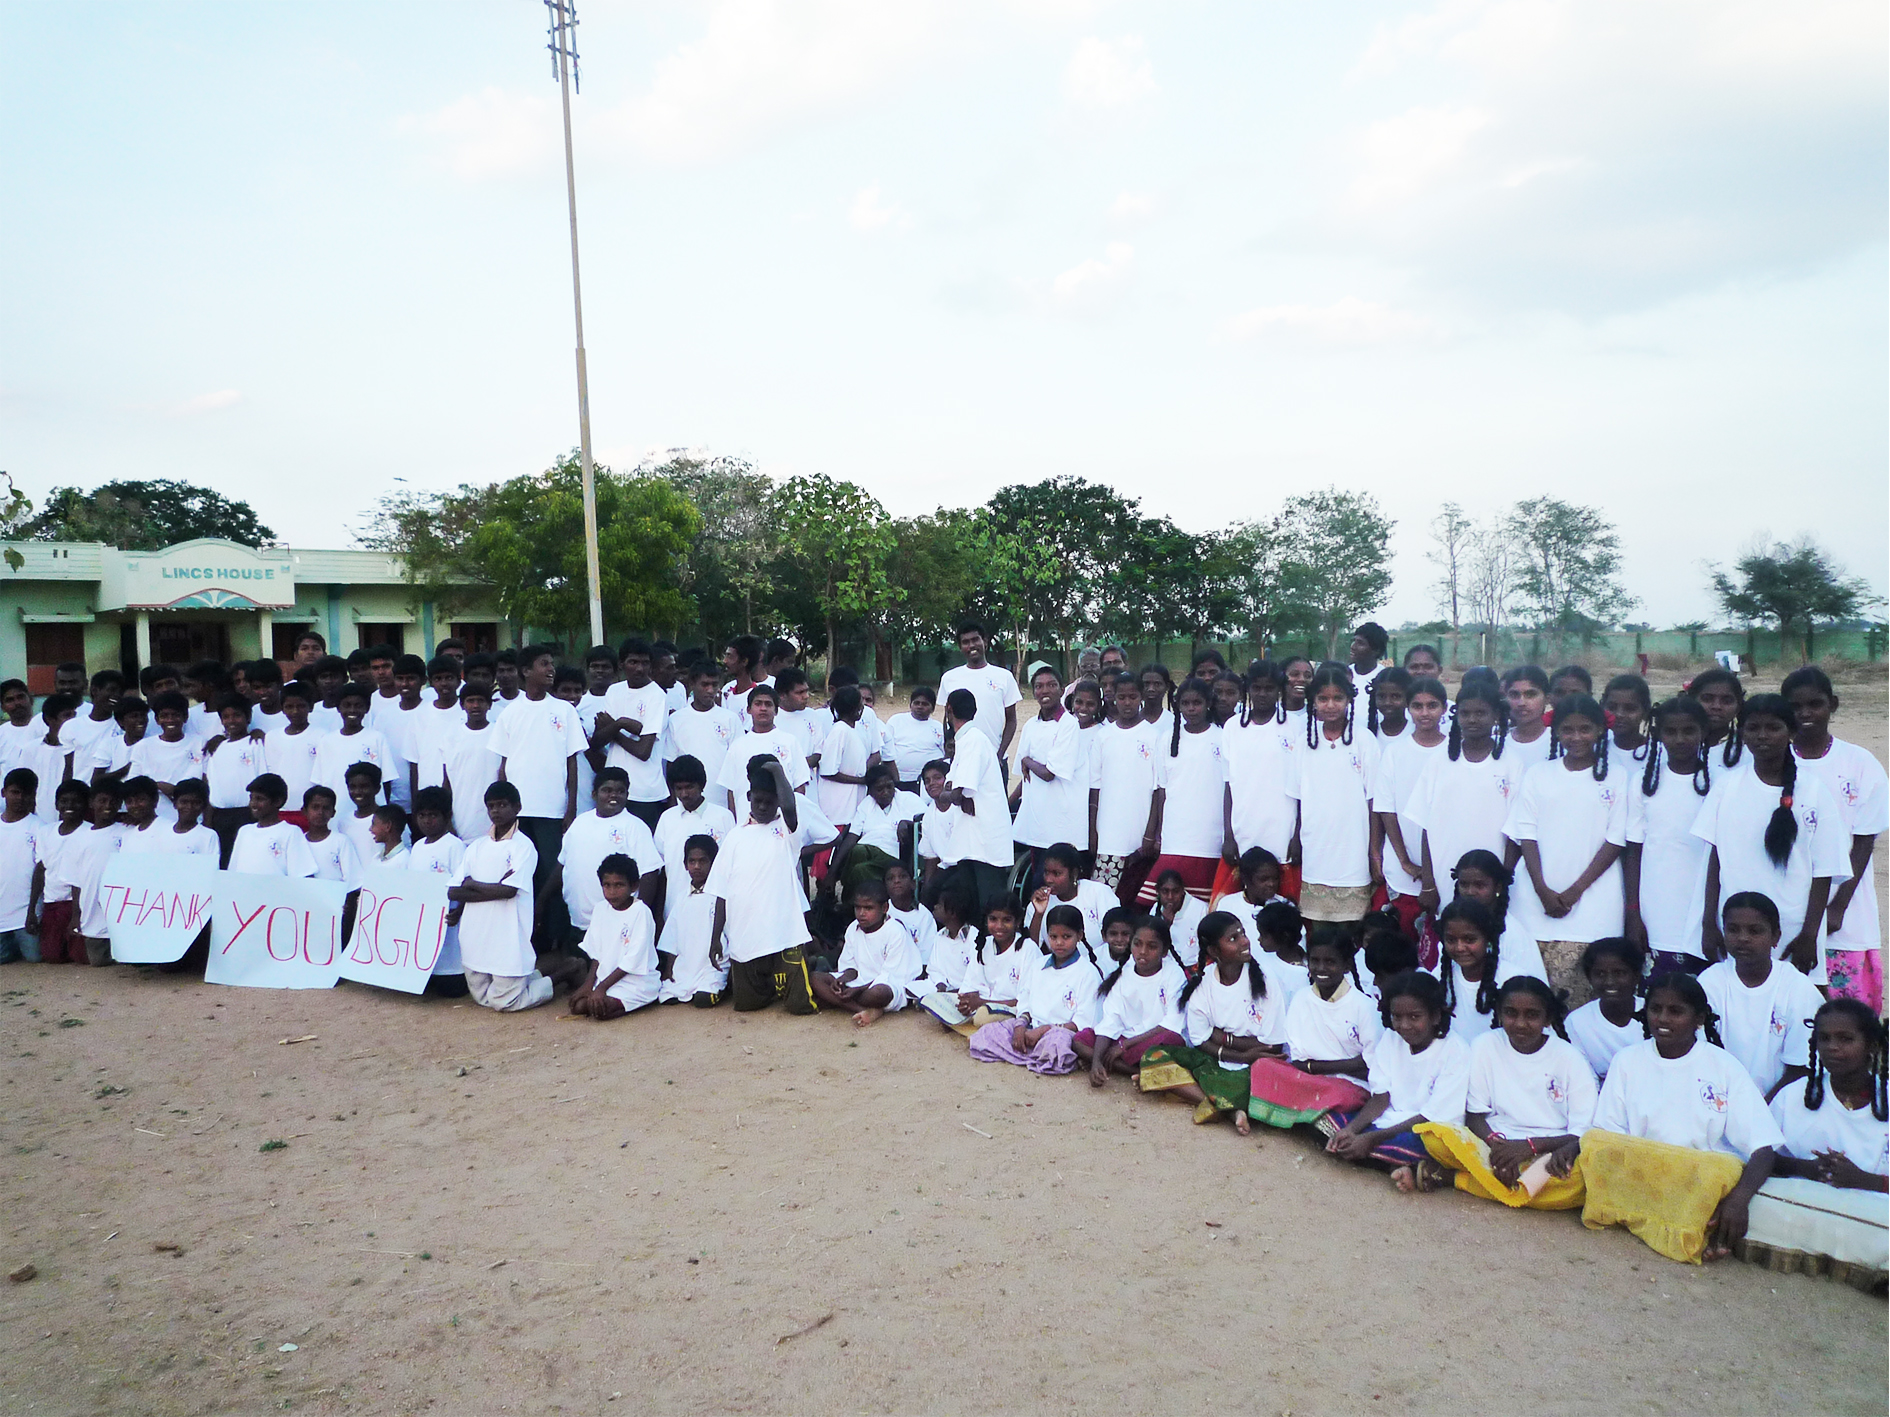 Students of Bishop Grosseteste University donated uniforms to Indian students. Photo credits: Bishop Grosseteste University